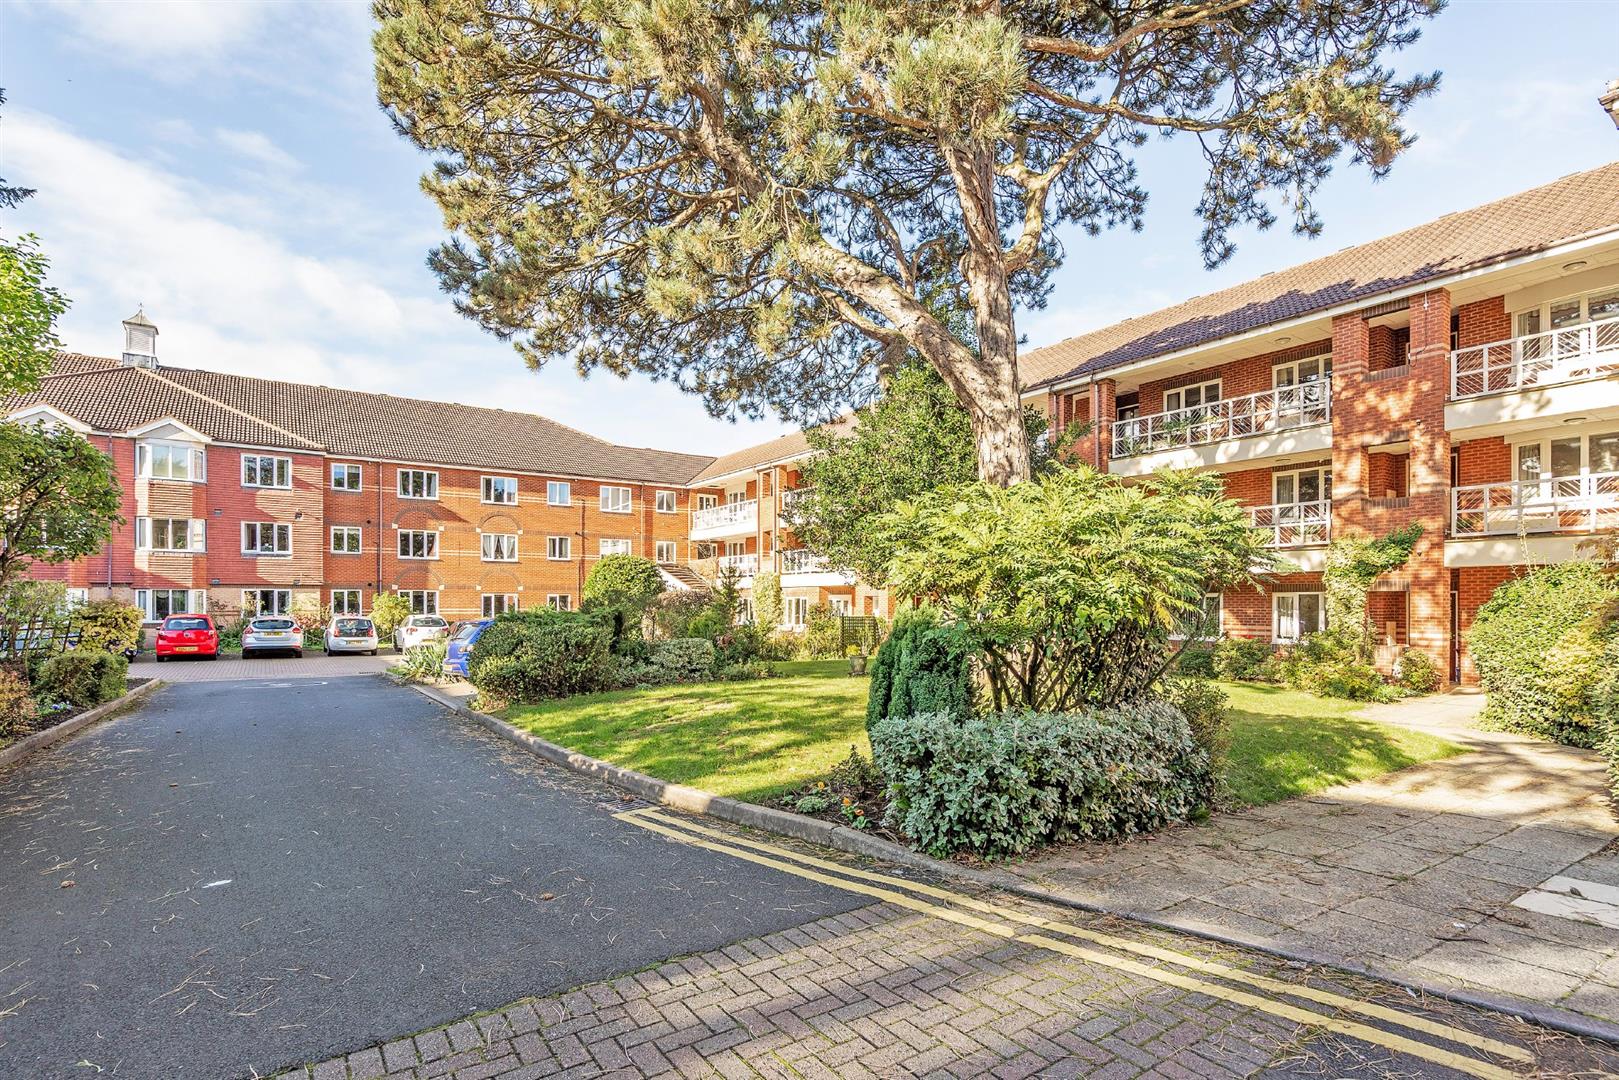 2 bed  for sale in Grange Road, Solihull, B91 